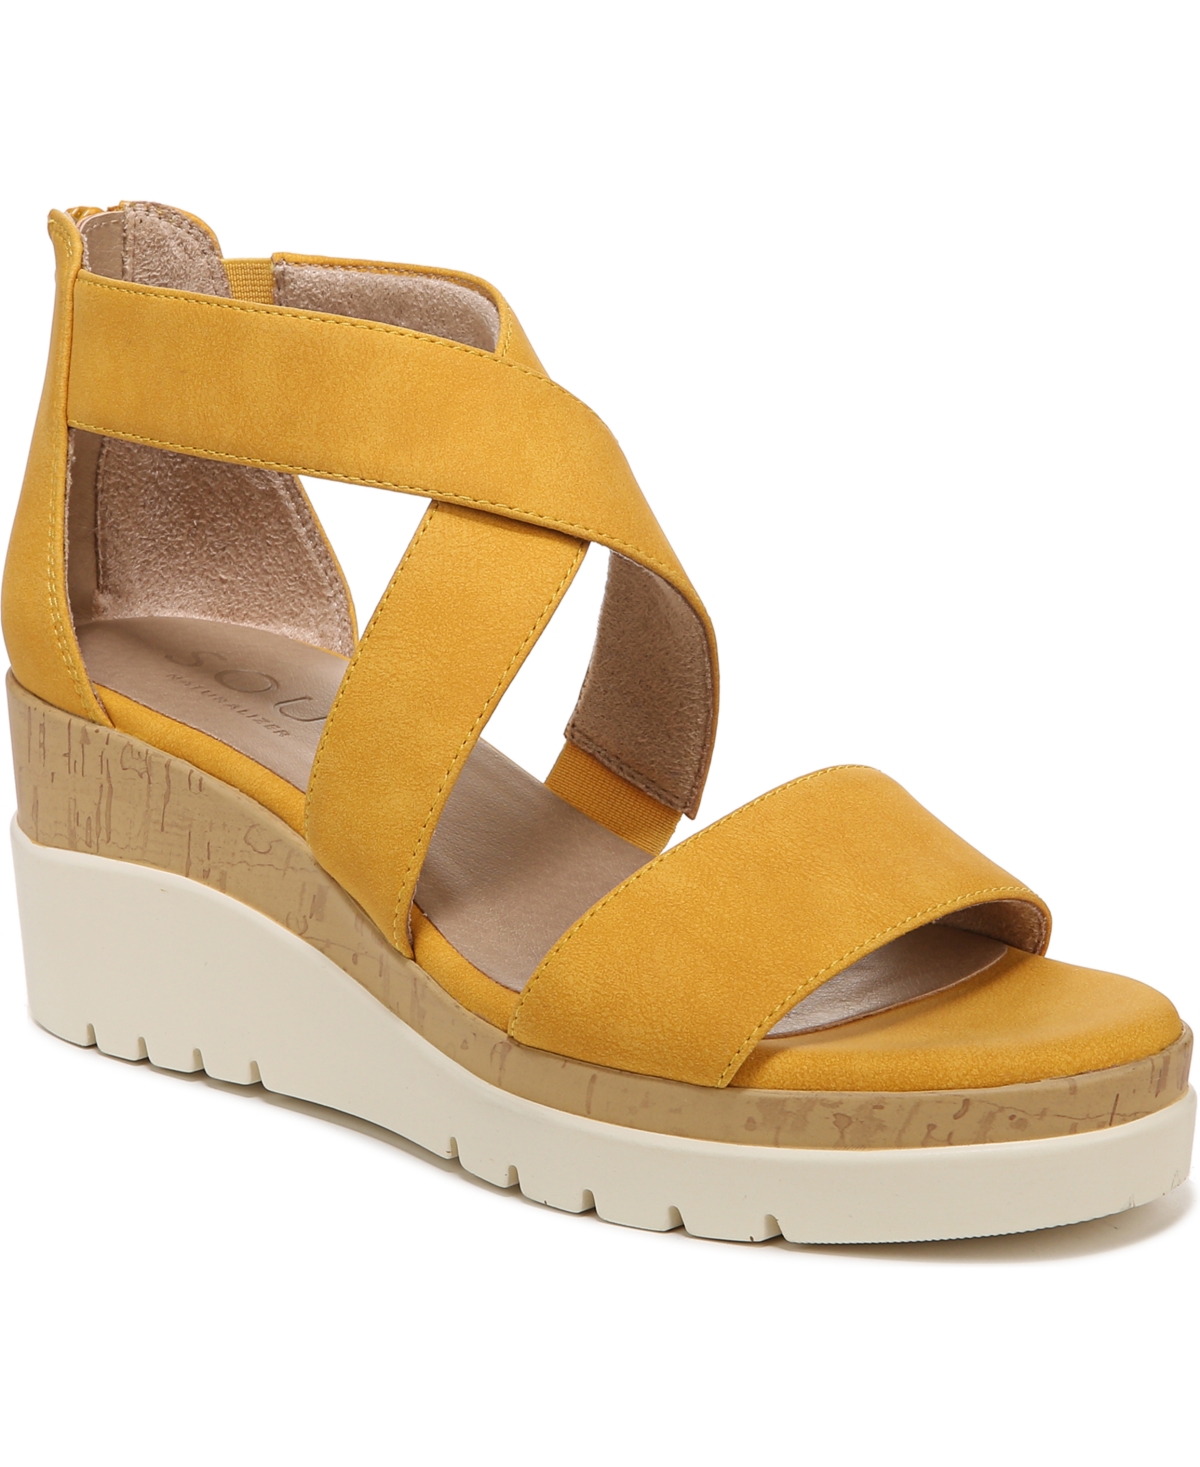 Soul Naturalizer Goodtimes Ankle Strap Wedge Sandals Women's Shoes In Yellow Faux Leather